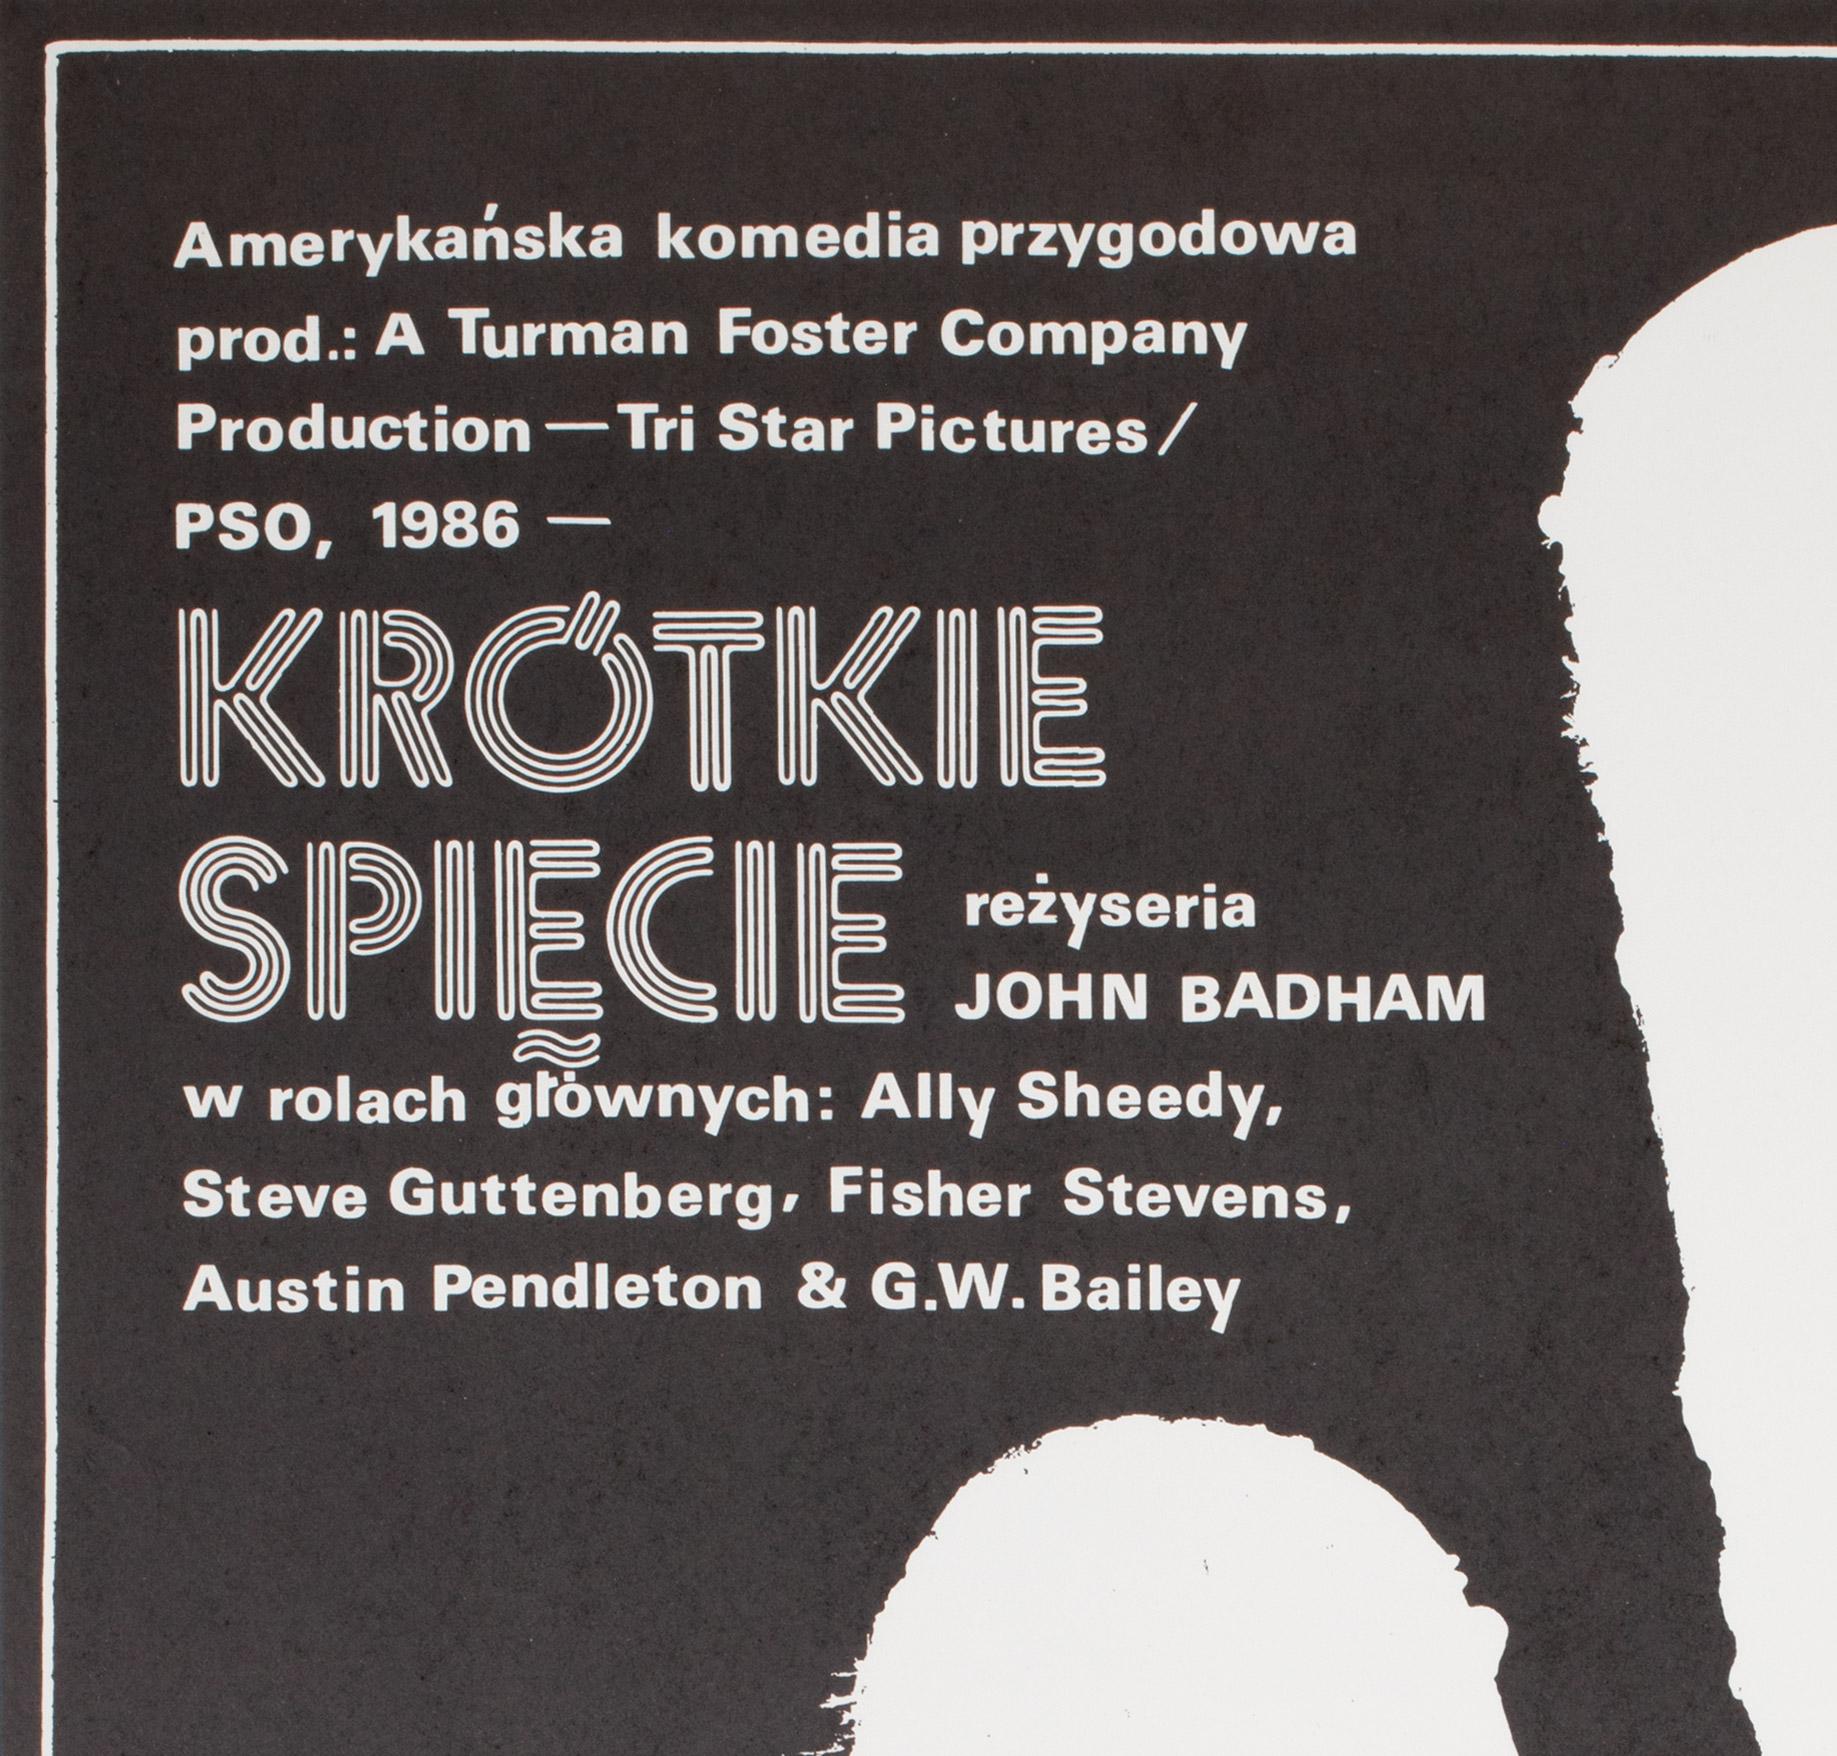 Short Circuit 1988 Polish Film Movie Poster, Jakub Erol In Excellent Condition For Sale In Bath, Somerset